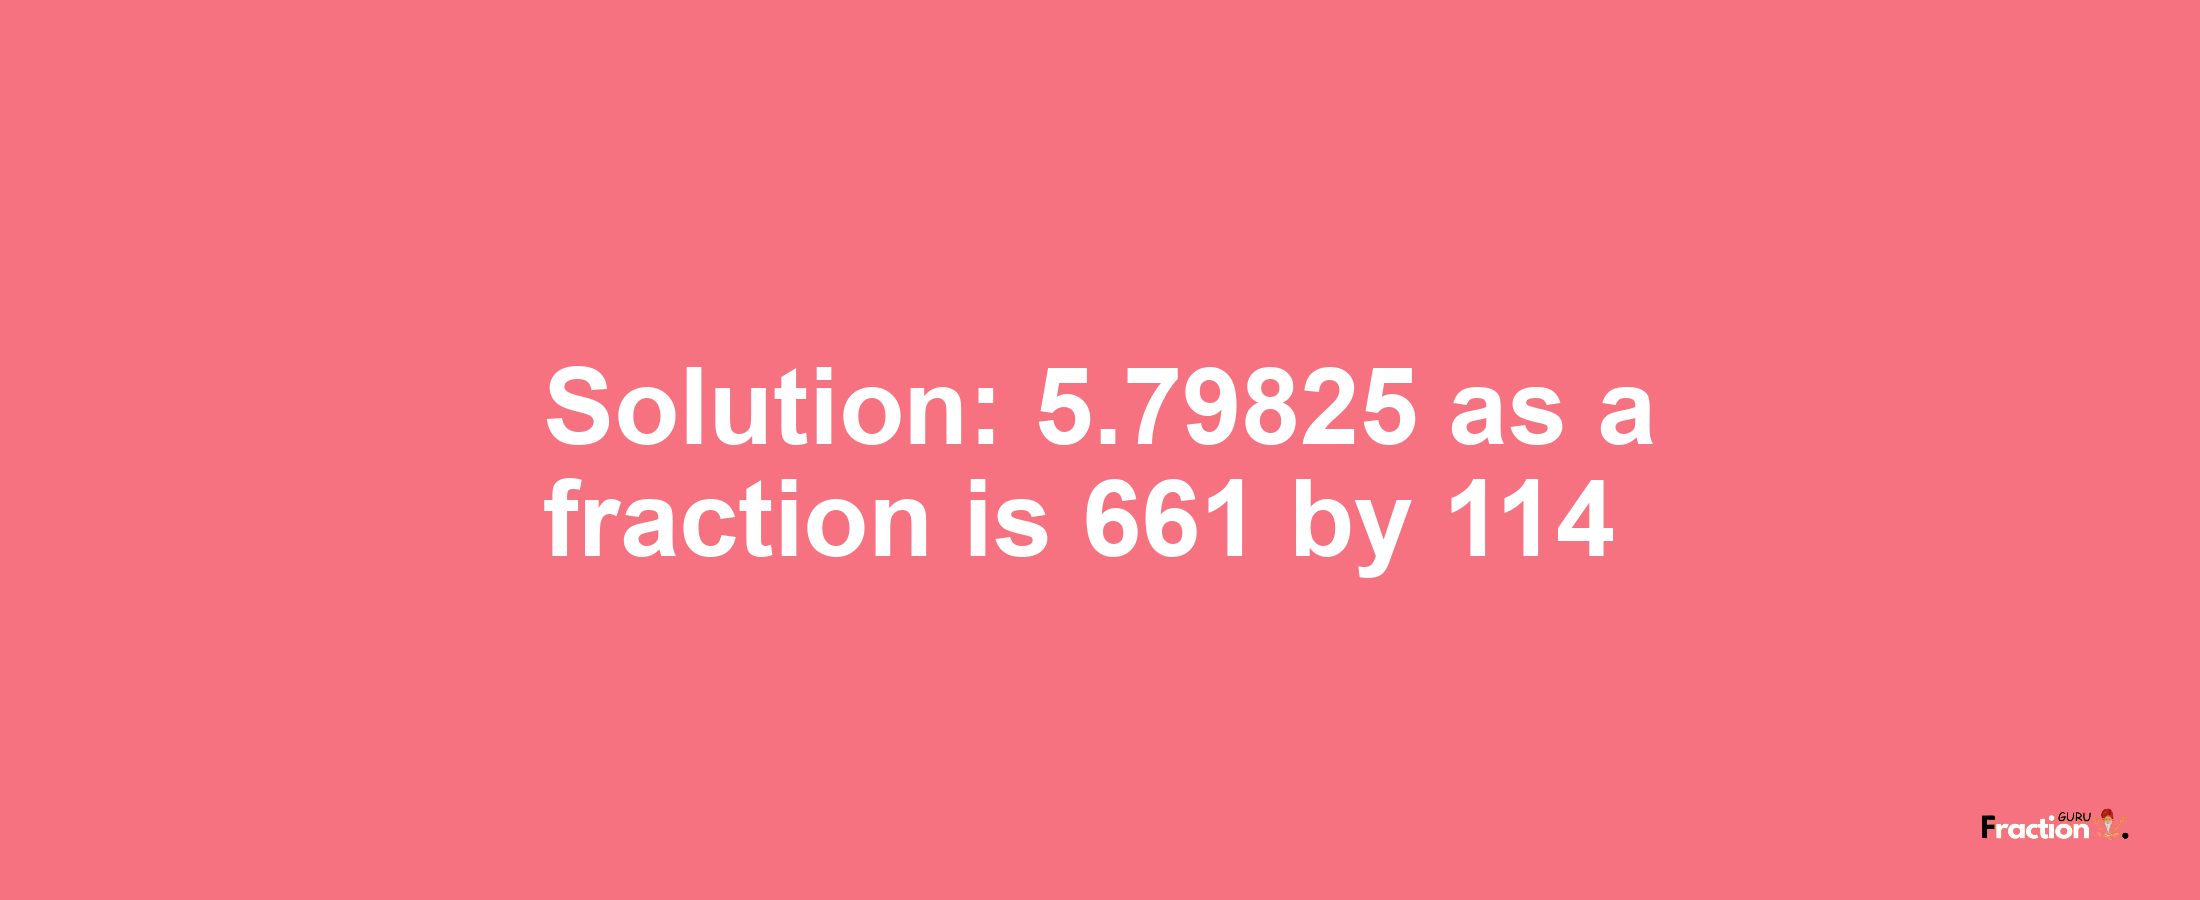 Solution:5.79825 as a fraction is 661/114